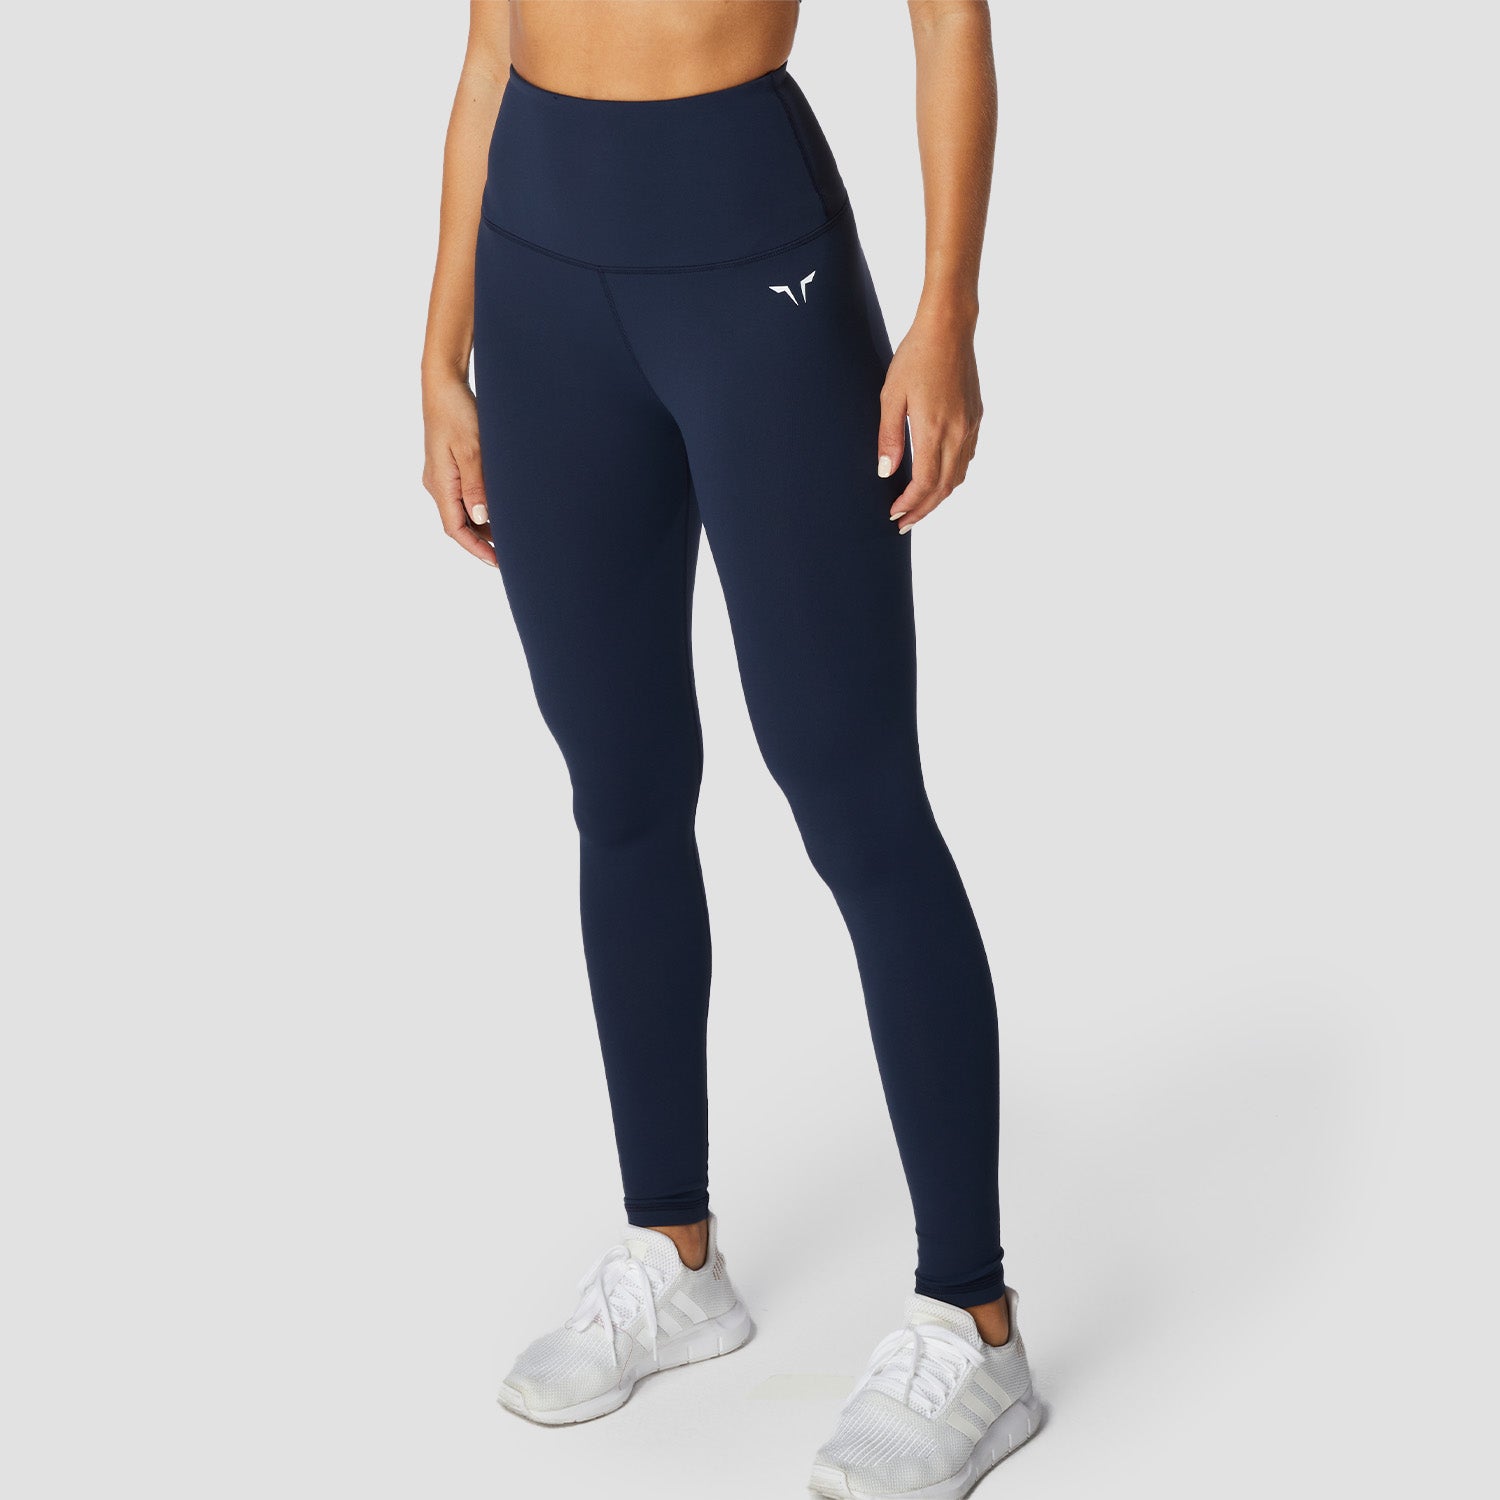 squatwolf-workout-clothes-hera-high-waisted-leggings-navy-gym-leggings-for-women